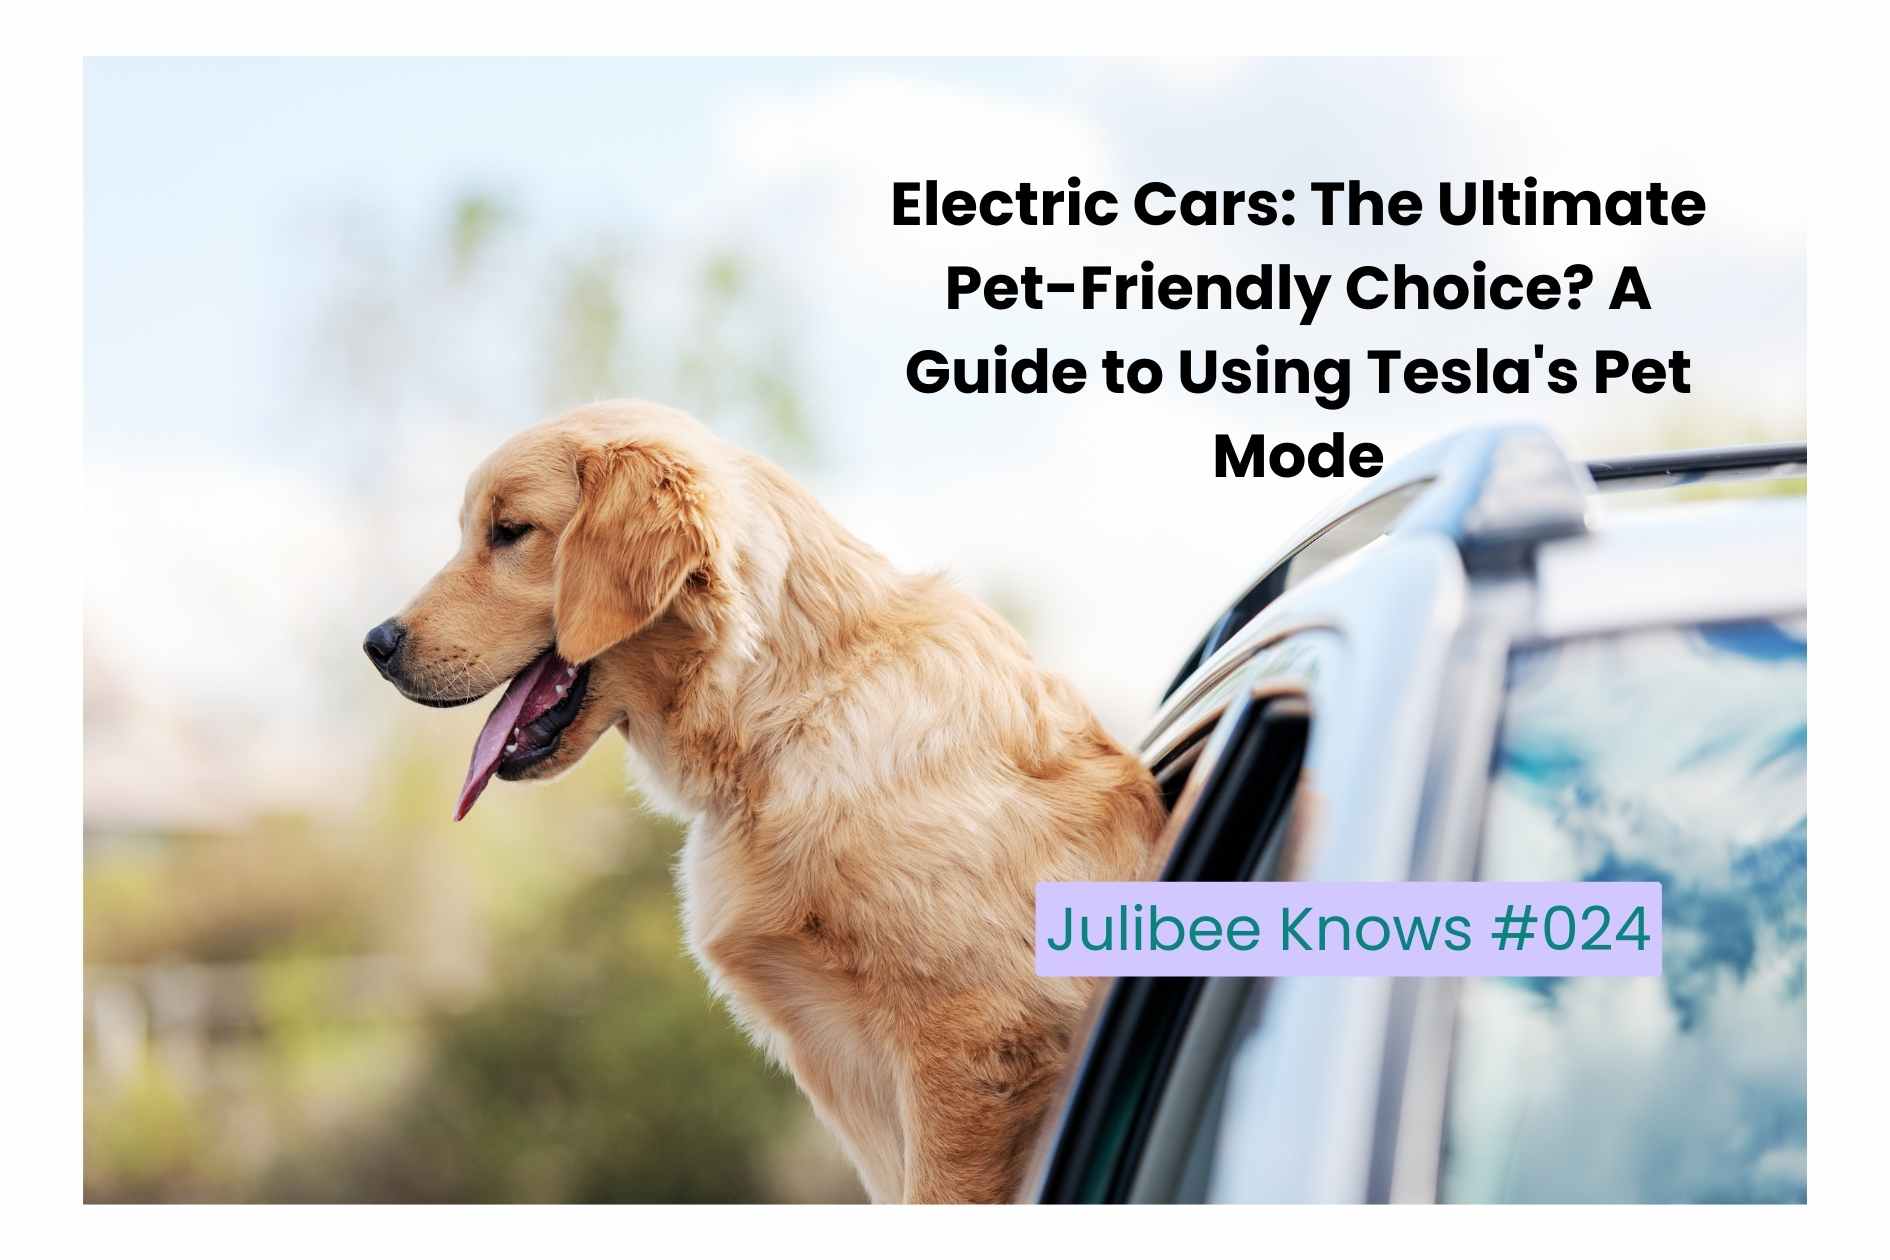 Electric Cars: The Ultimate Pet-Friendly Choice? A Guide to Using Tesla's Pet Mode - Julibee's